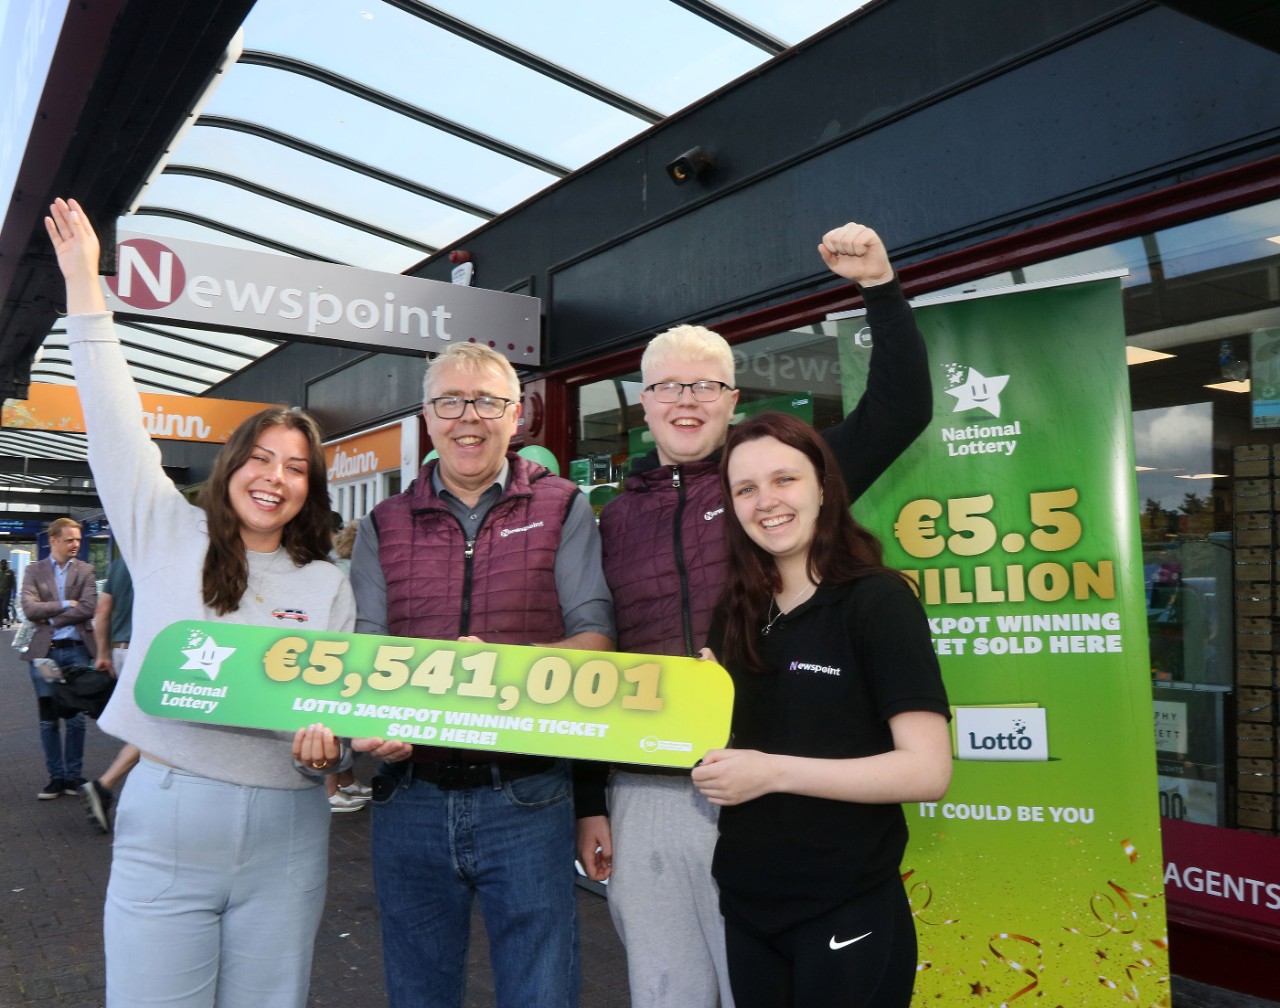 A local store in Galway city has been revealed as the selling location for last Wednesday’s (3rd August) Lotto jackpot winning ticket worth an astonishing €5,541,001. Newspoint newsagent, Unit 25, Galway Shopping Centre, on the Headford Road, sold the winning Marked play with Plus ticket on Wednesday 3rd August. Pictured here celebrating the news at the shop are: Ciara Kilmartin, Billy and Liam Shearer and Leah Purcell. Pic Iain McDonald / Mac Innes Photography